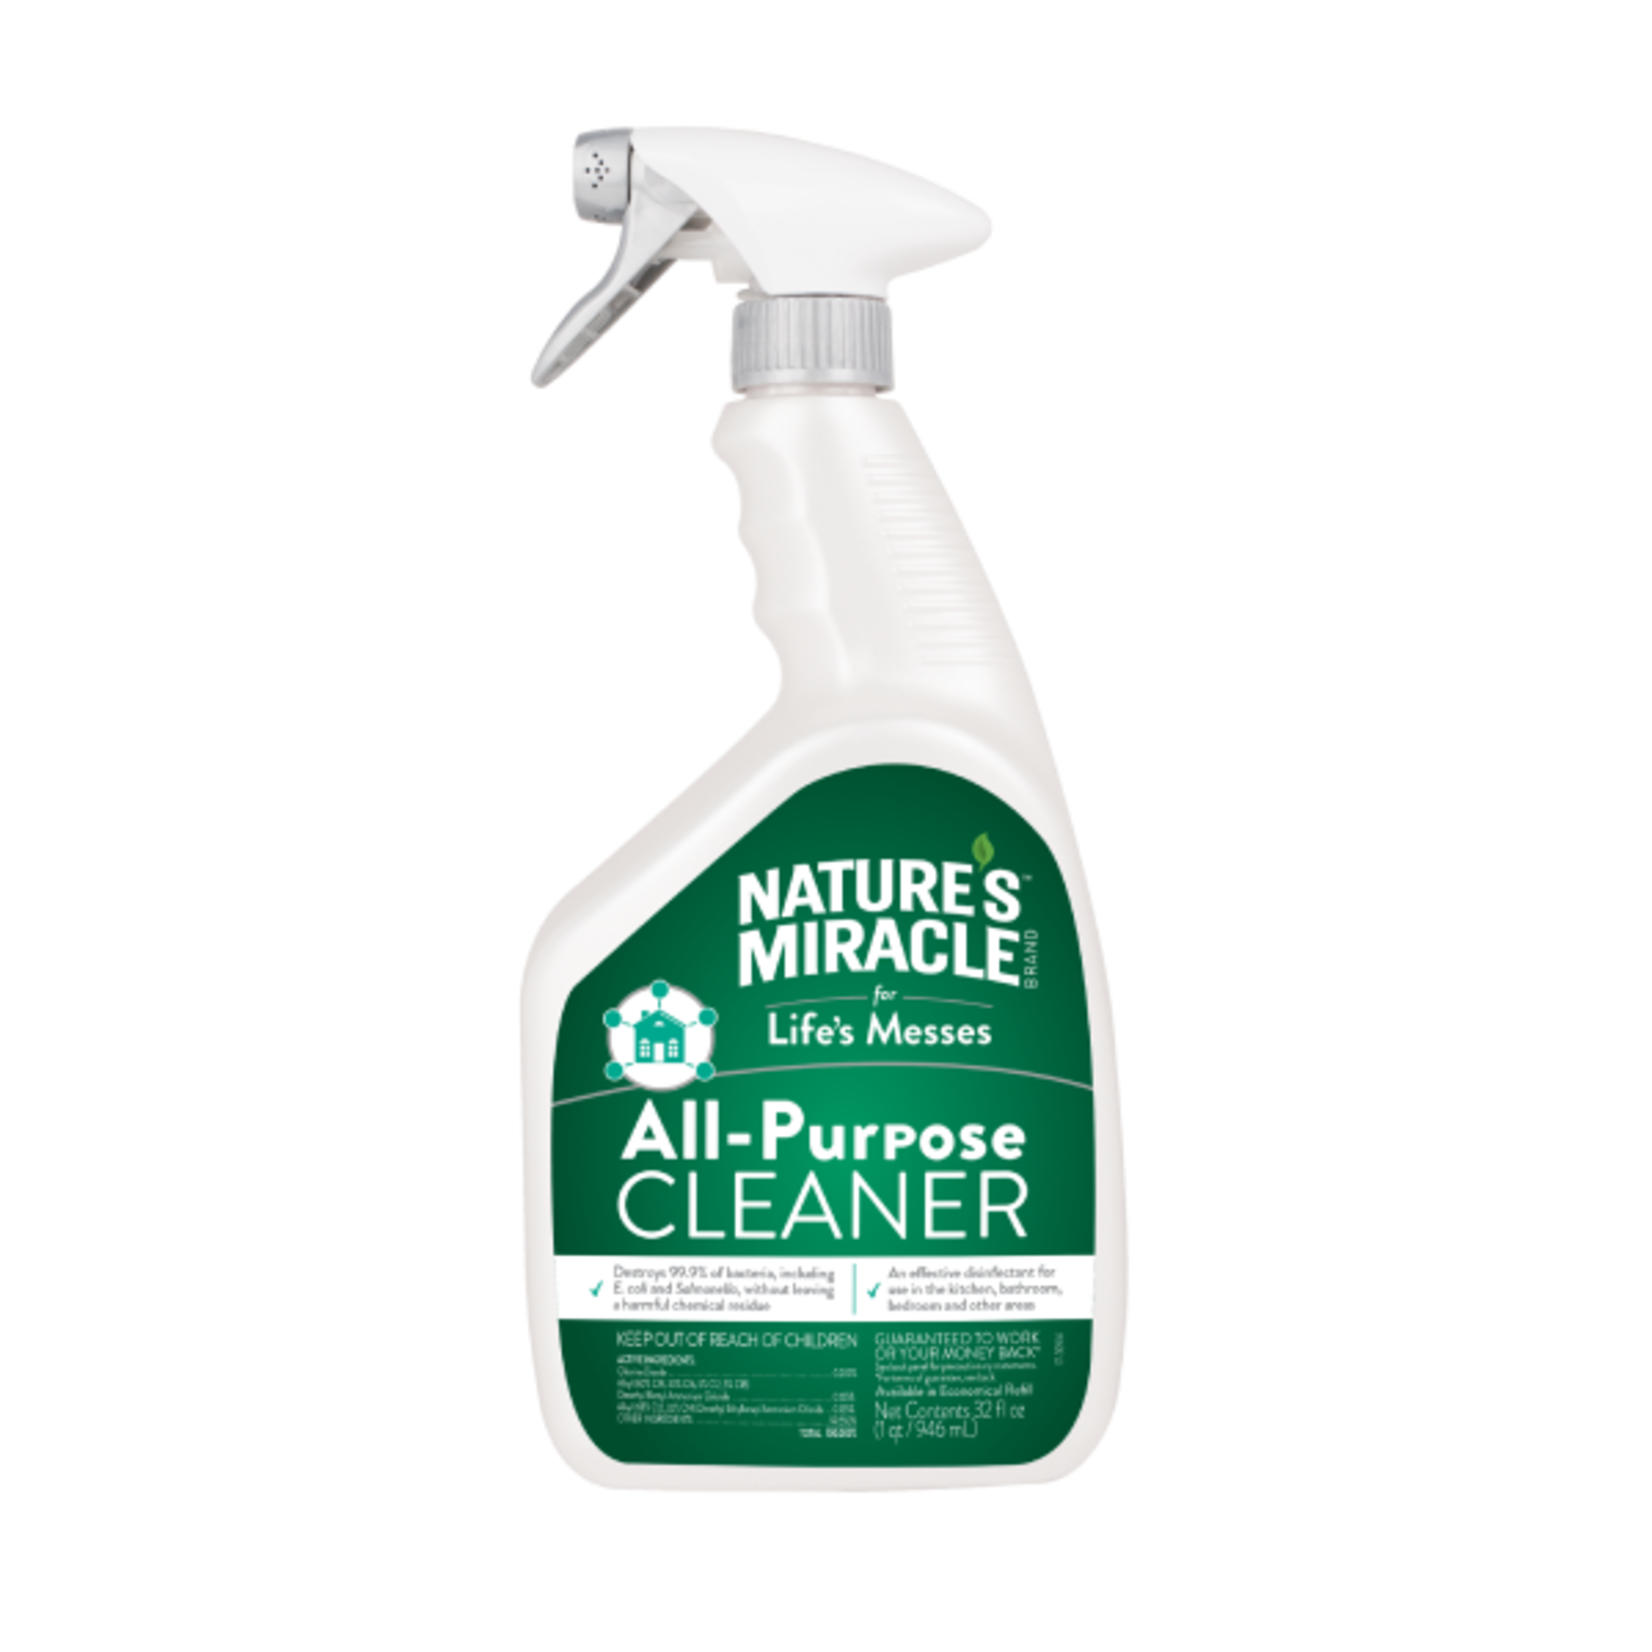 Nature's Miracle Nature's Miracle All Purpose Cleaner w/ Trigger Spray 32 oz